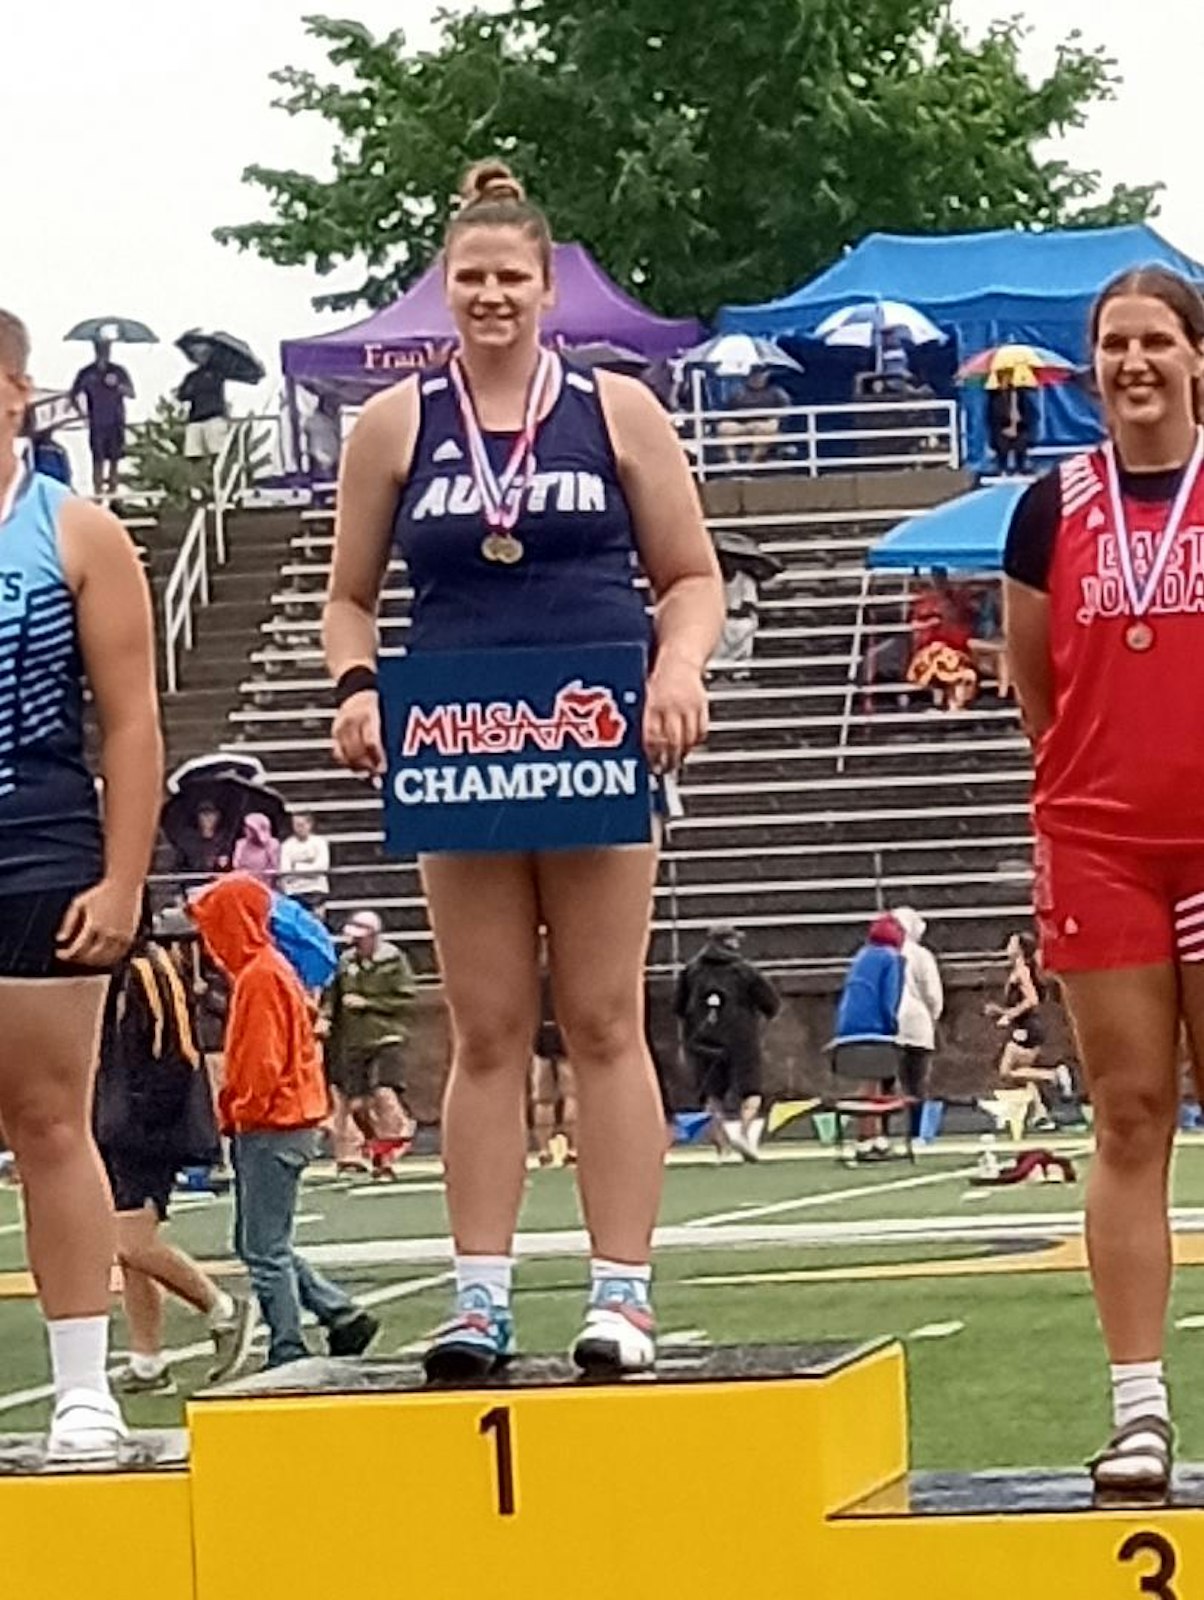 Senior Lyla Mullins became Chesterfield Austin Catholic’s first state champion in any sport, winning both the shot put and discus events at the Division 4 finals at Hudsonville (Contributed photo)